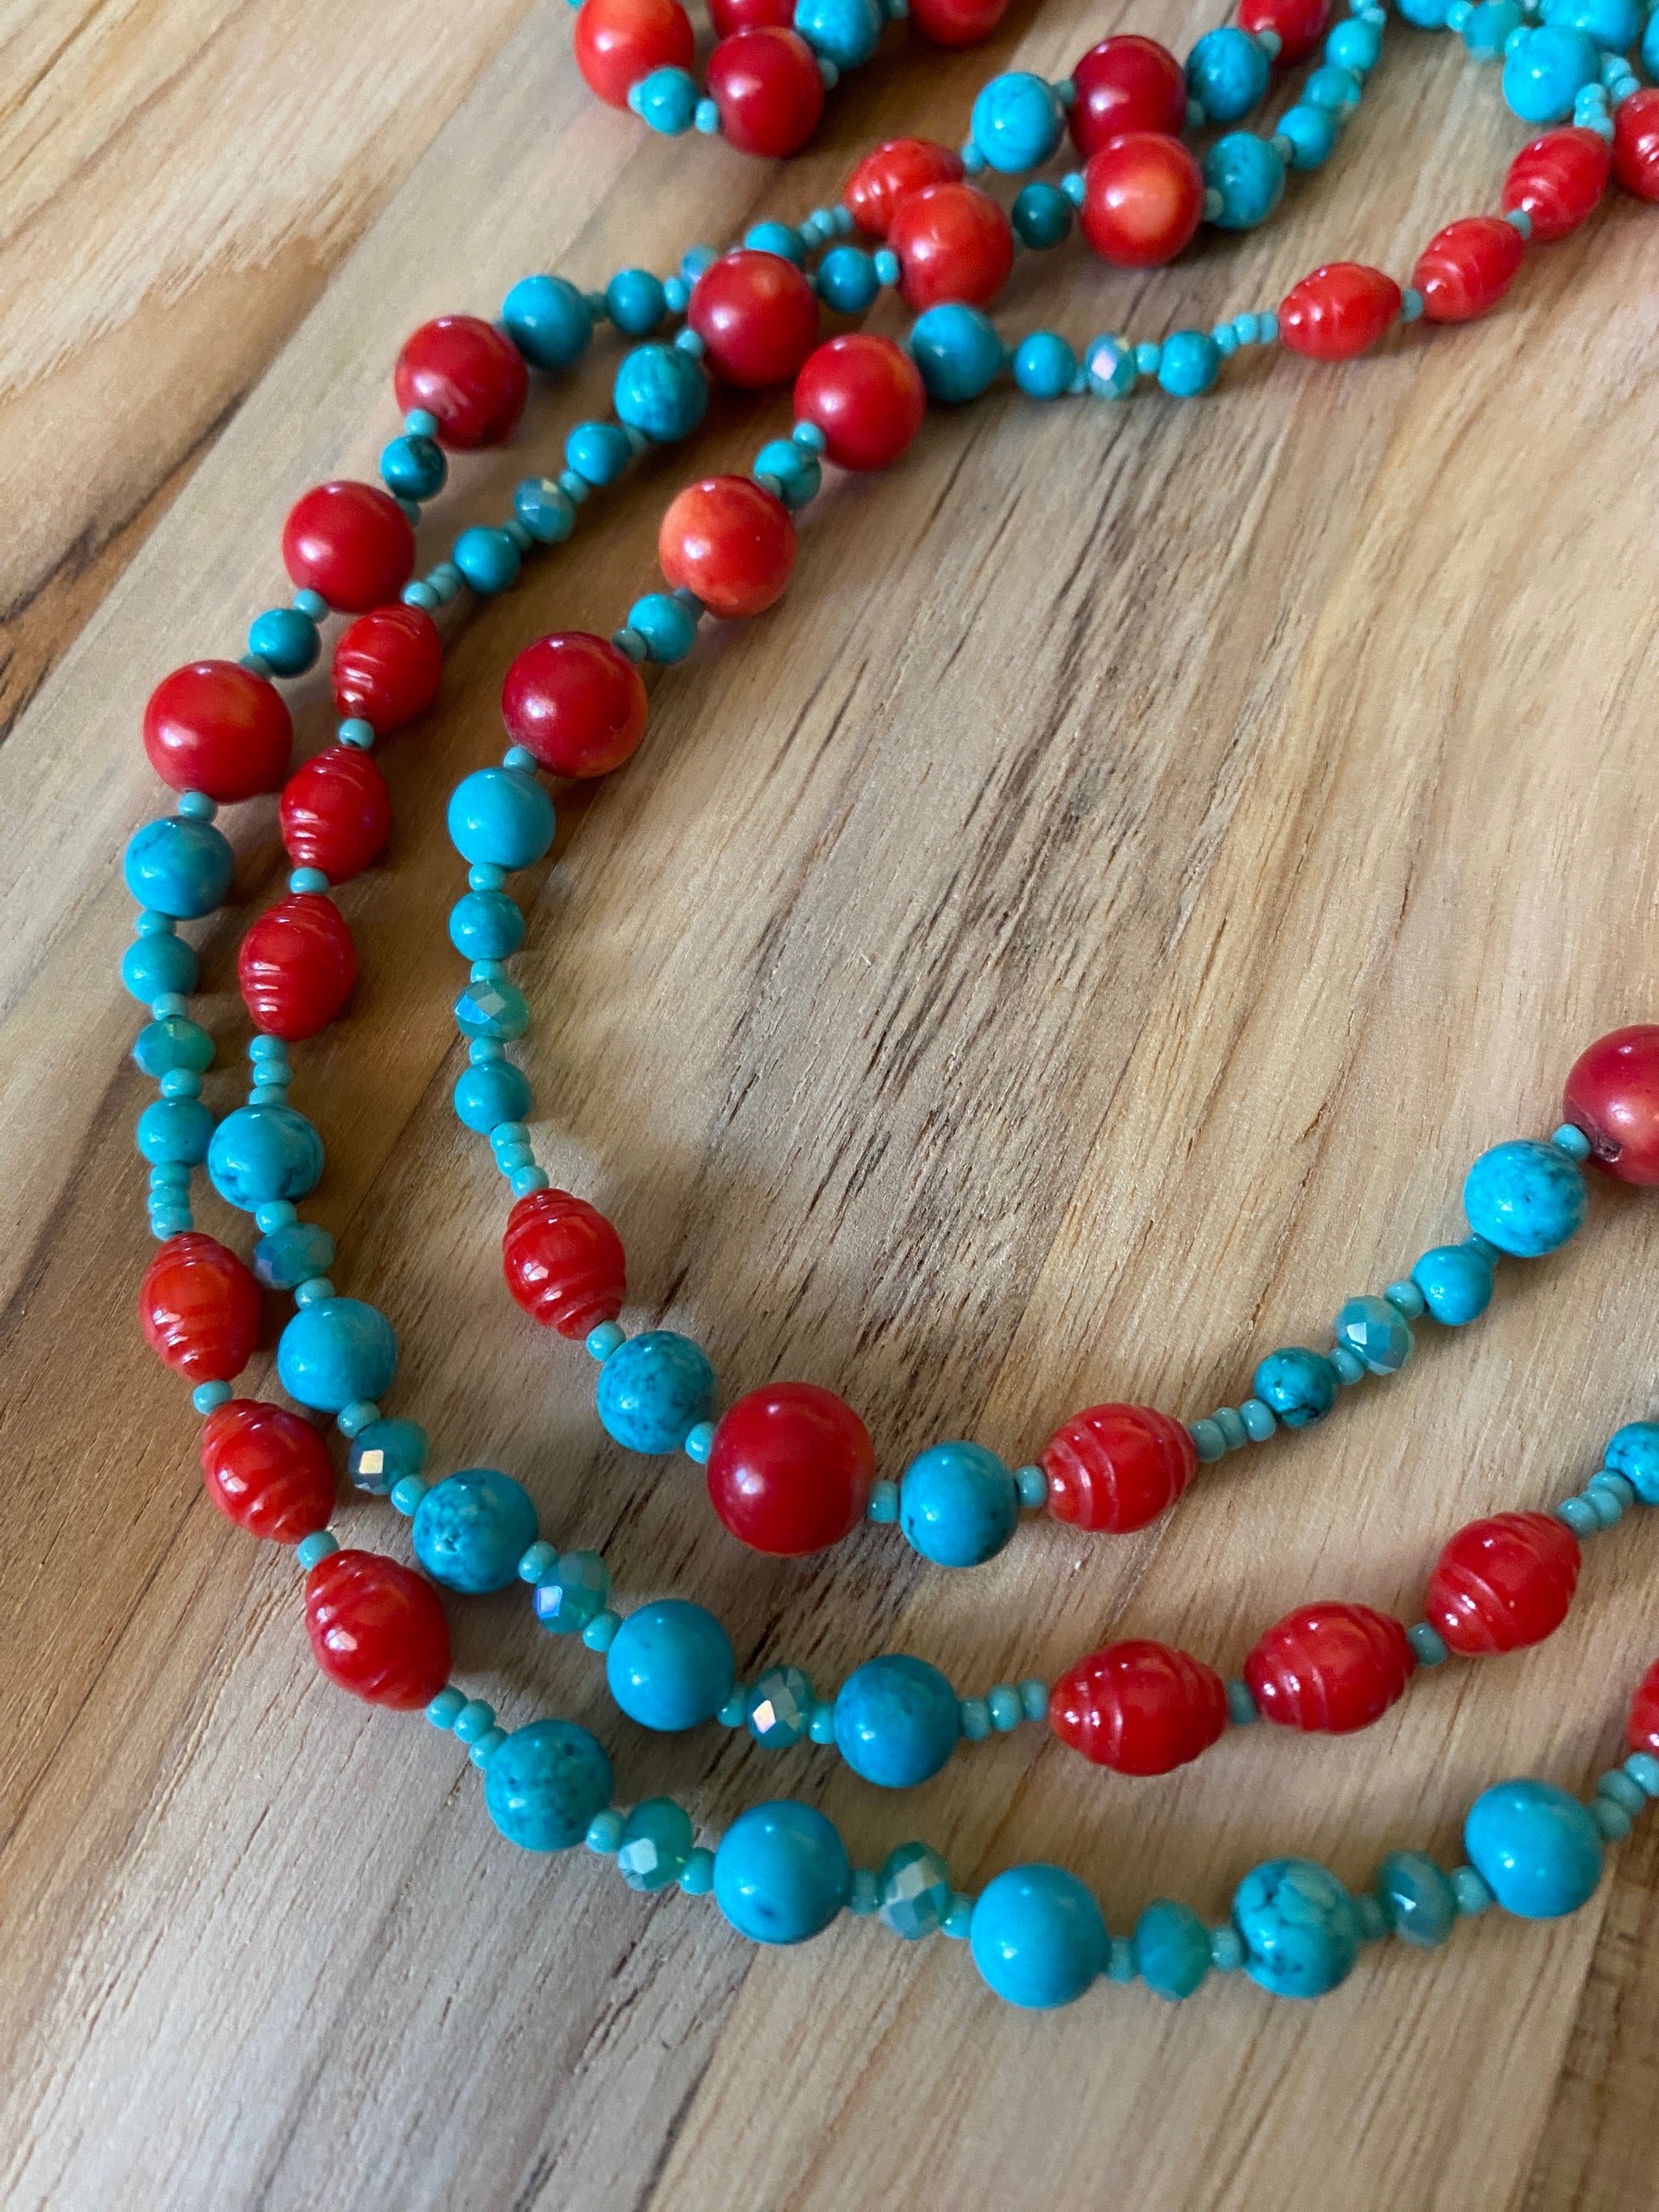 65" Long Southwestern Inspired Turquoise, Red & Crystal Beaded Necklace - My Urban Gems